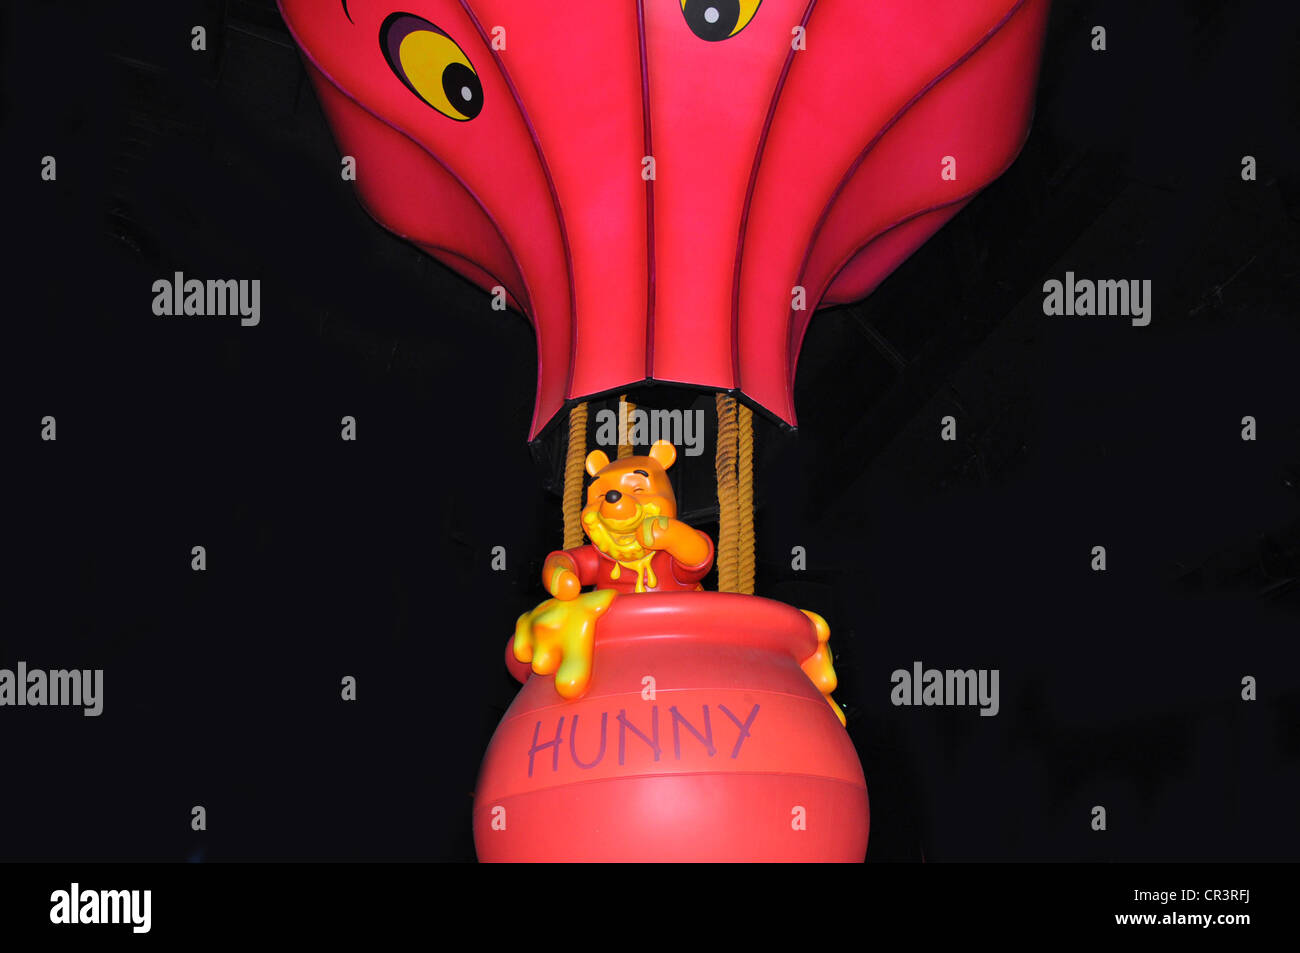 Figure Of Winnie The Pooh And Hunny Pot Stock Photo - Download Image Now -  Winnie The Pooh, Book, Horizontal - iStock